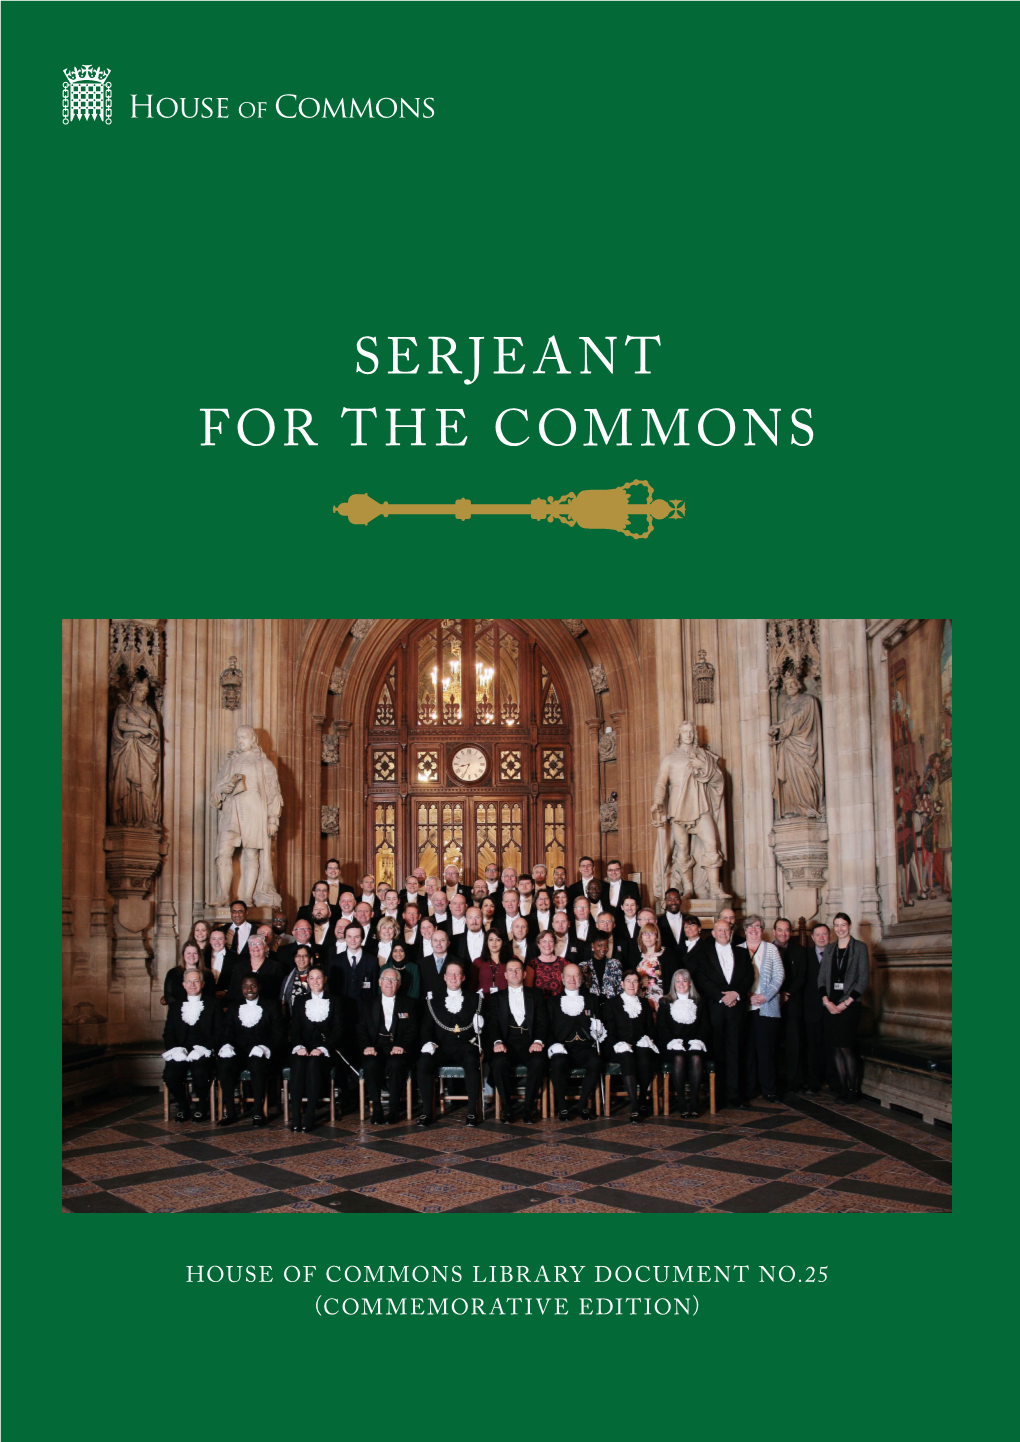 SERJEANT for the COMMONS COMMEMORATIVE EDITION 600Th Anniversary 2015 Is a Particularly Special Year of Anniversaries at Parliament